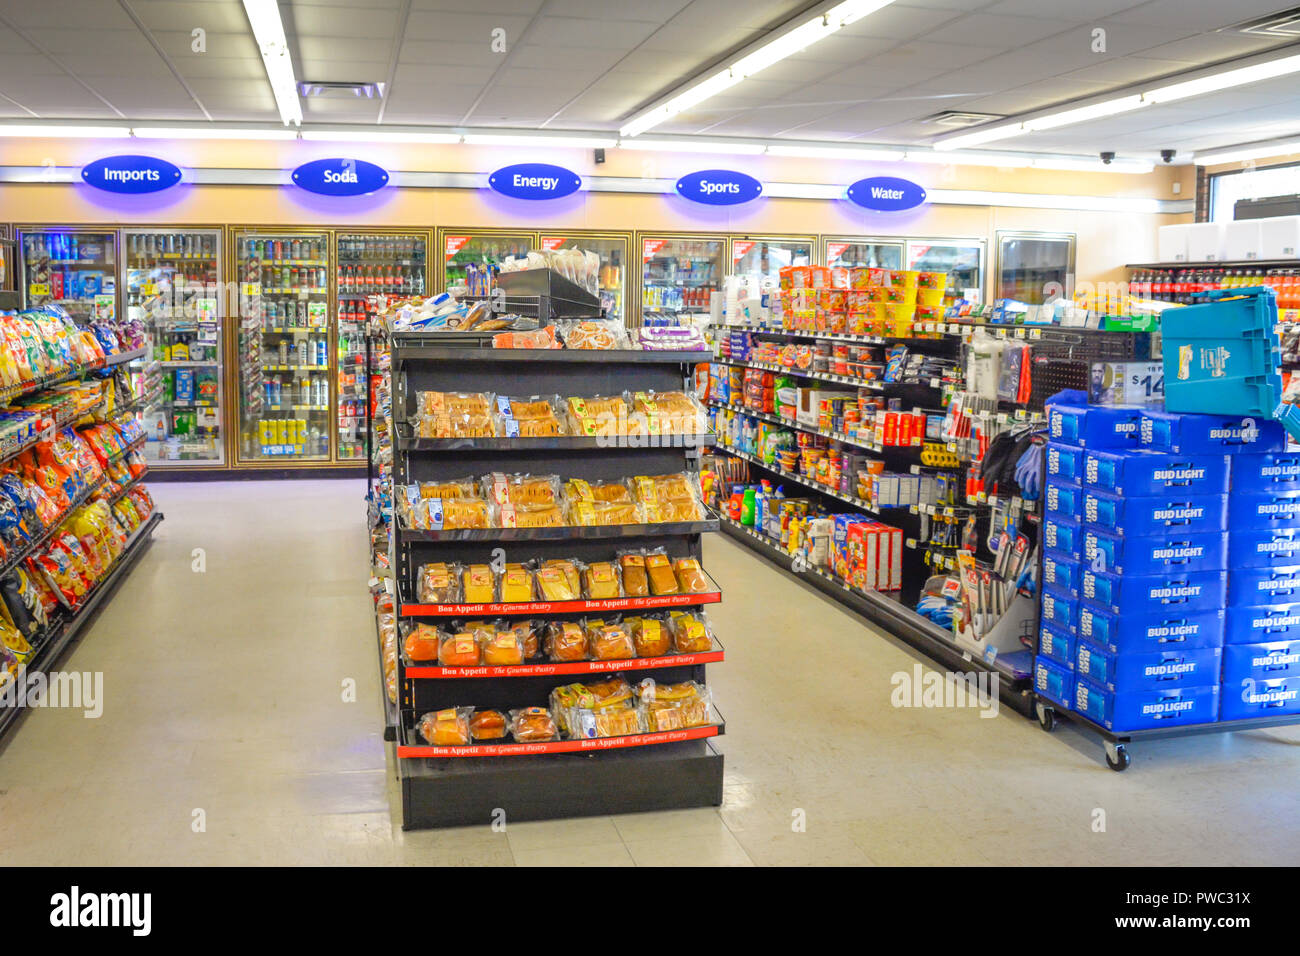 Interior Of Generic Convenience Market With Aisles Of Snack Foods And